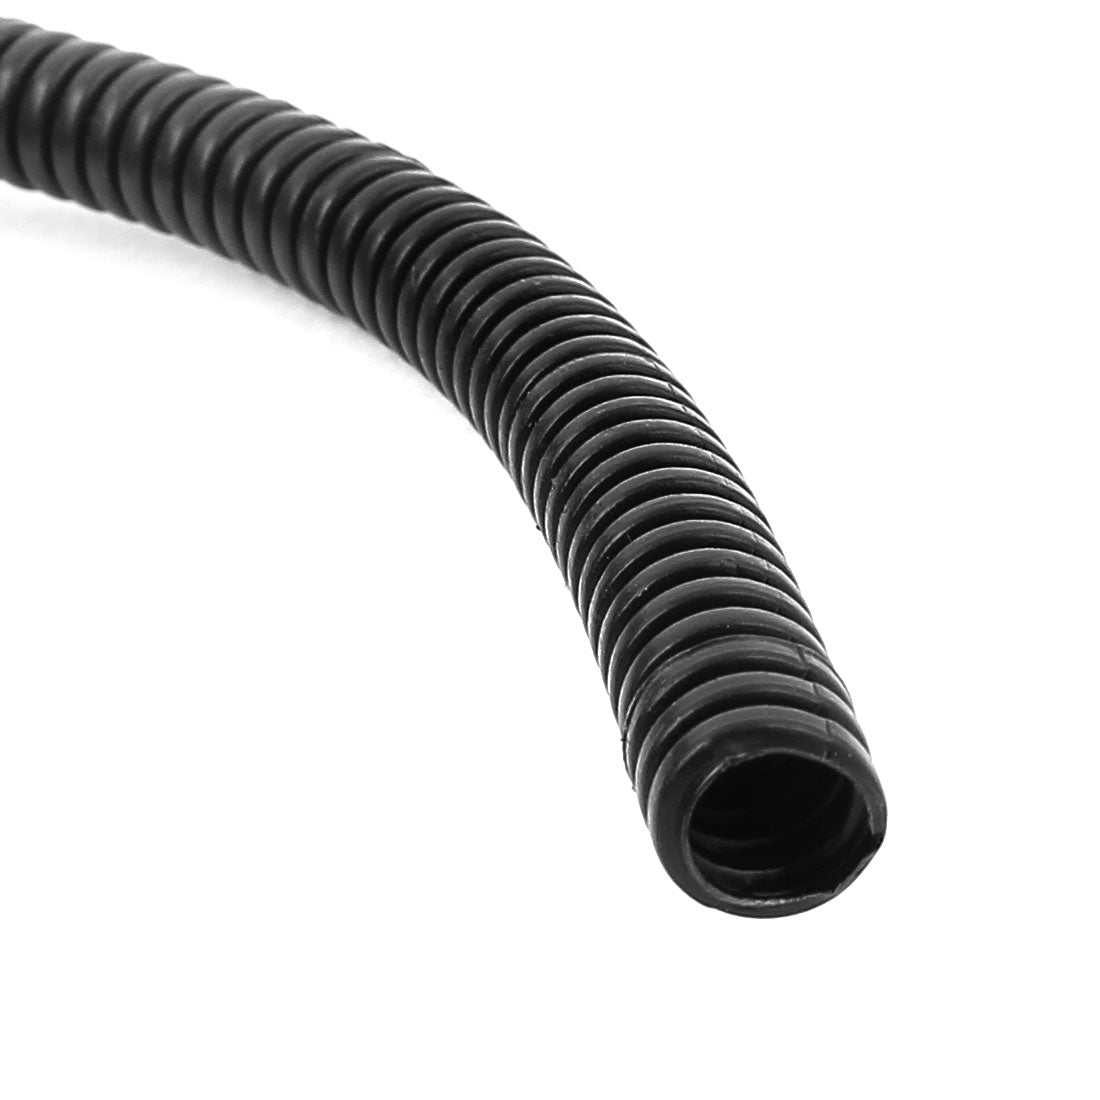 uxcell Uxcell 1.9 M 7 x 10 mm Plastic Flexible Corrugated Conduit Tube for Garden,Office Black